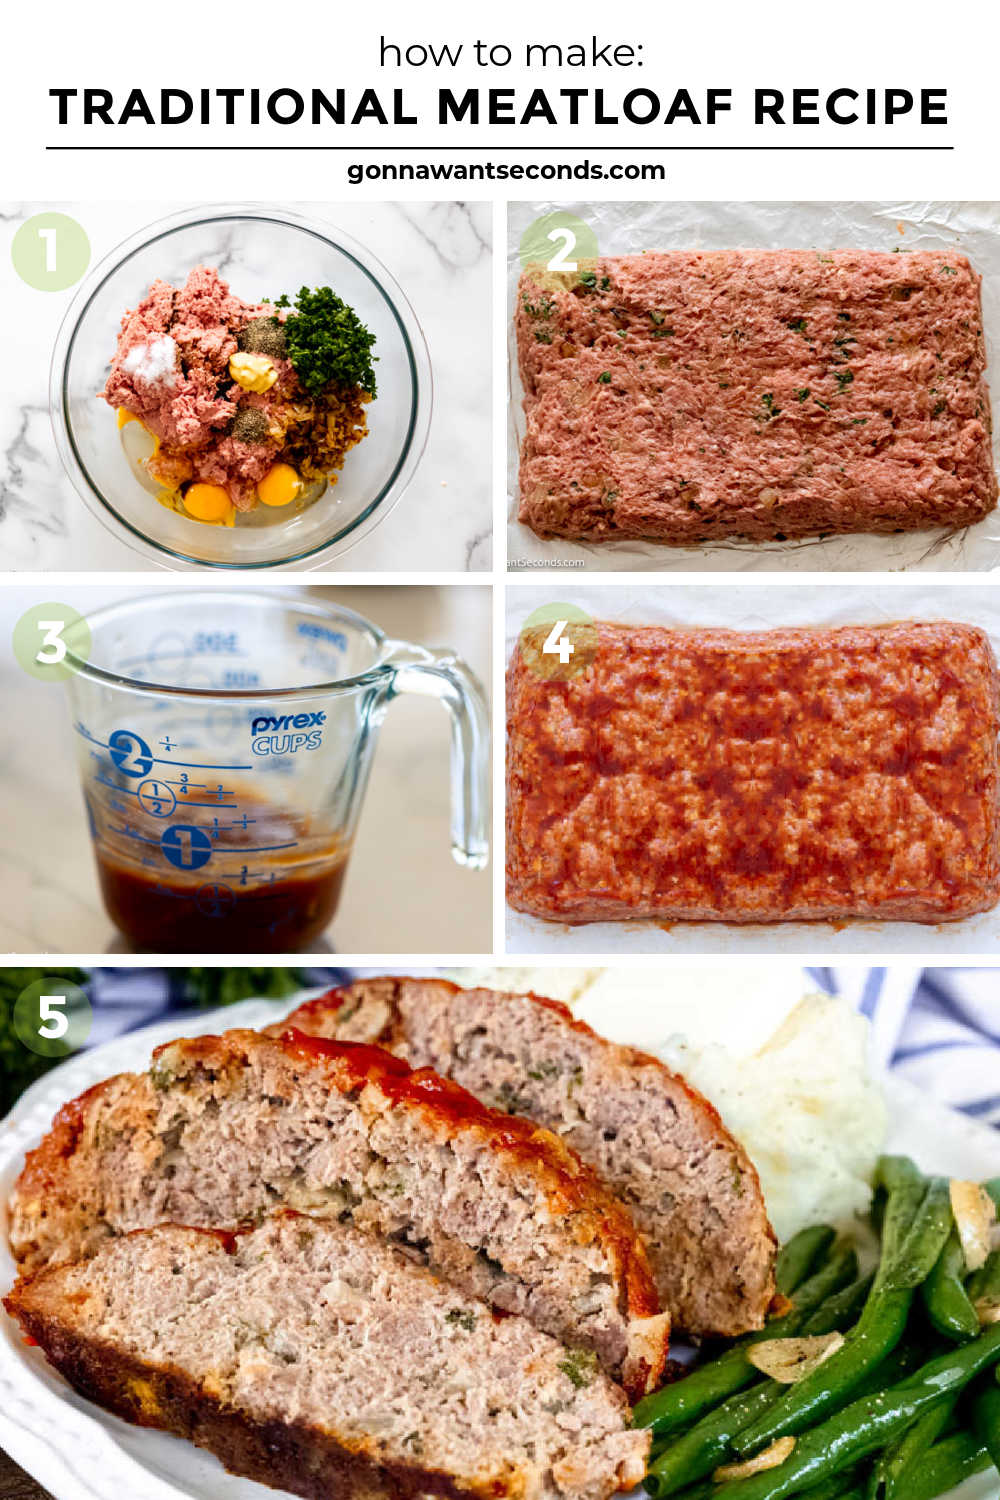 Step by step how to make traditional meatloaf recipe